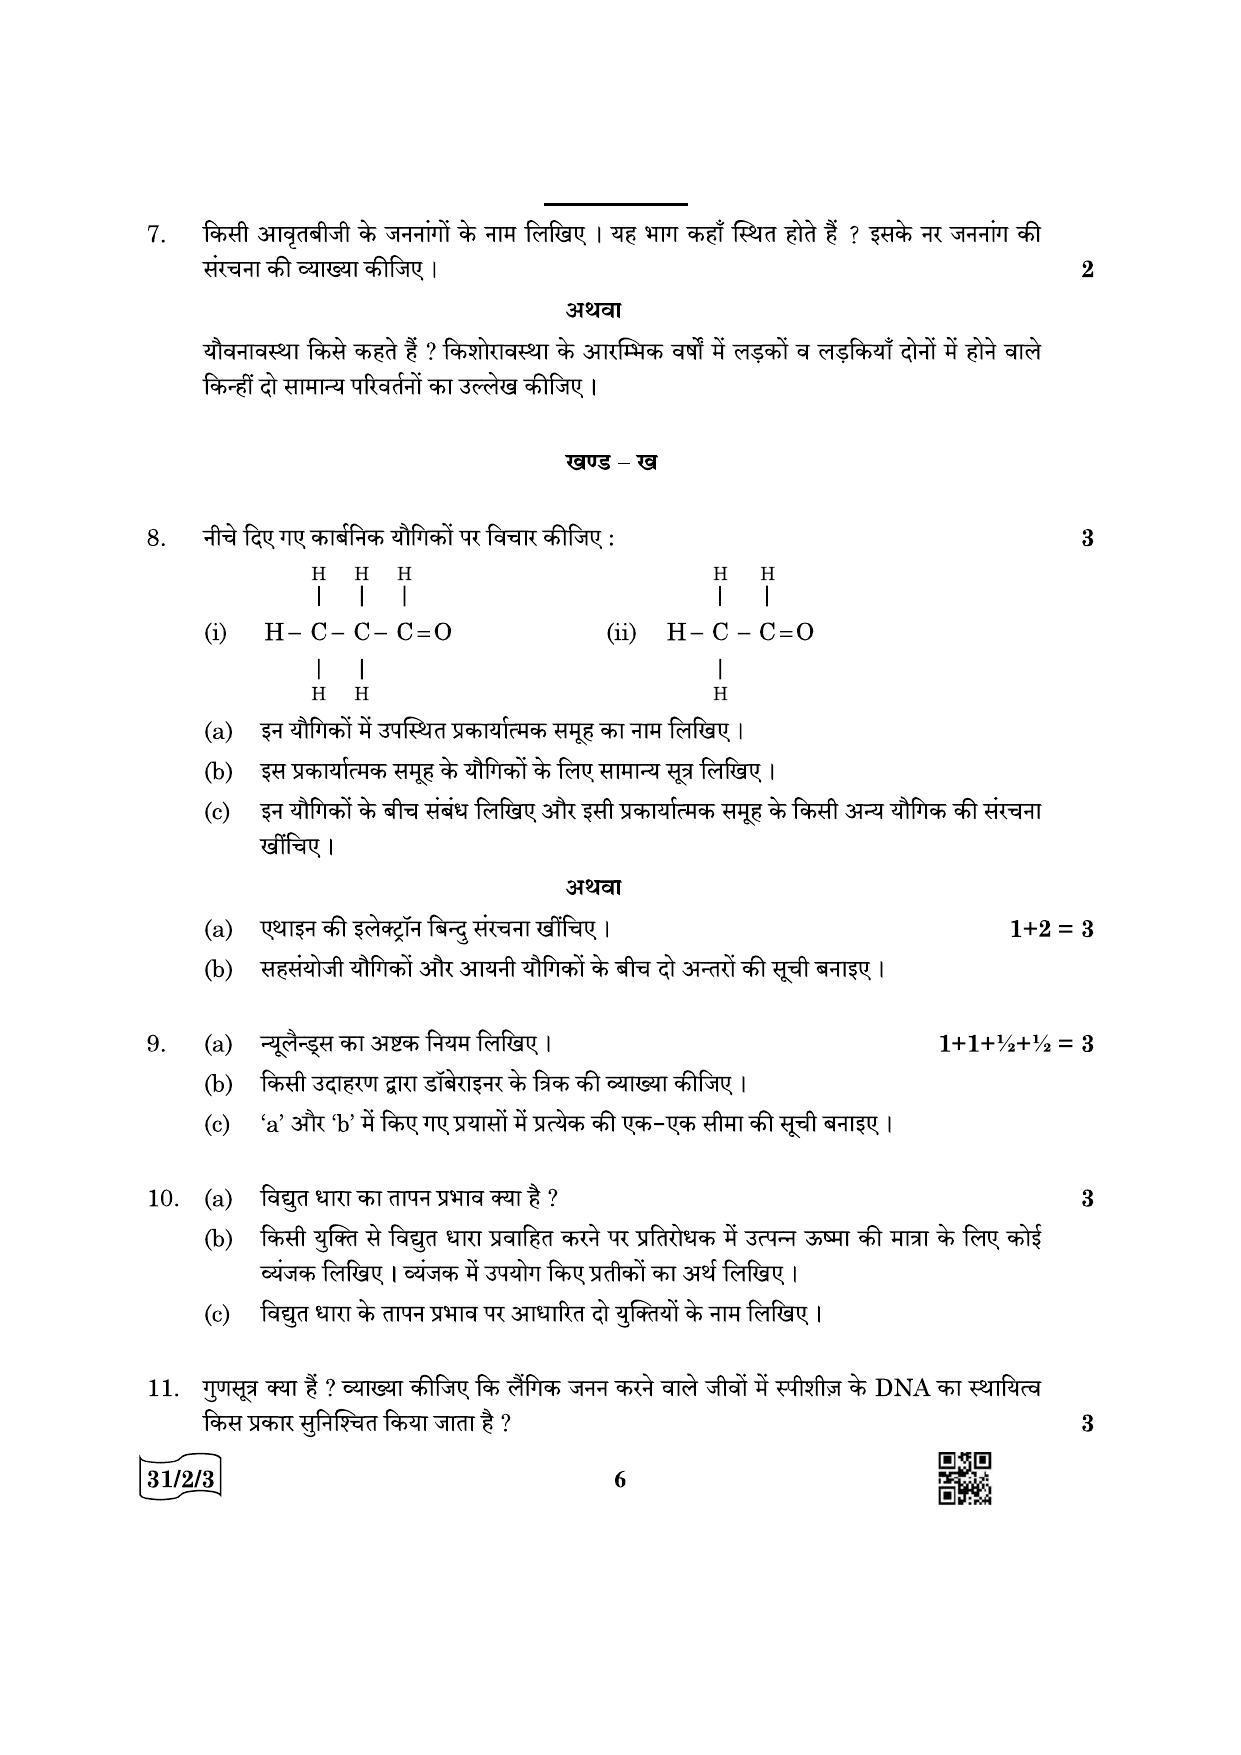 CBSE Class 10 31-2-3 Science 2022 Question Paper - Page 6